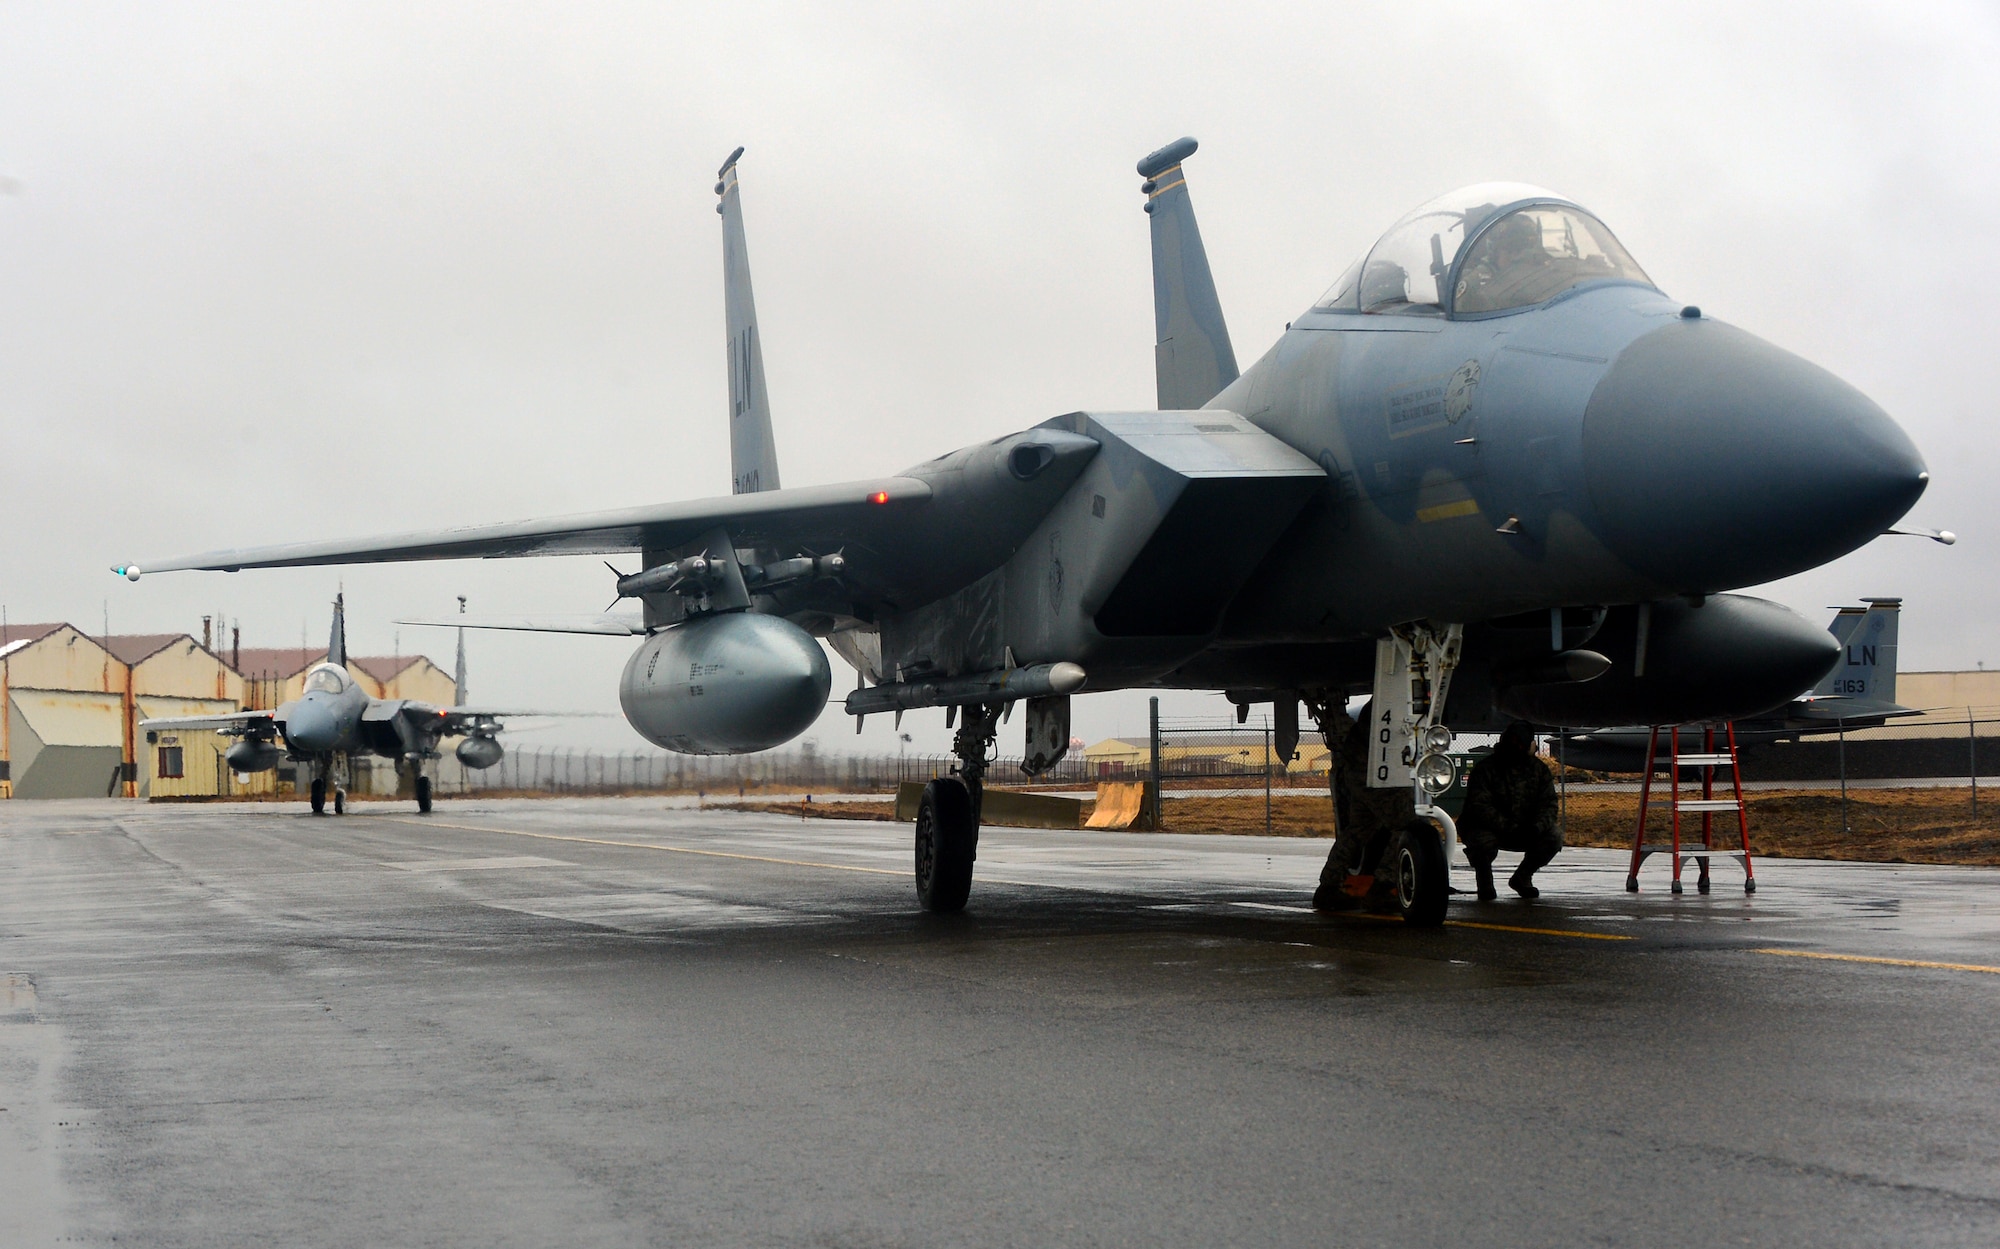 Two F-15C Eagle fighter aircraft with the 871st Air Expeditionary Squadron arrive at Keflavik International Airport, Iceland as part of Icelandic Air Surveillance and Policing operations April 13, 2015. IAS is an annual NATO mission designed to help provide security for Iceland's airspace. (U.S. Air Force photo by 2nd Lt Meredith Mulvihill/Released)